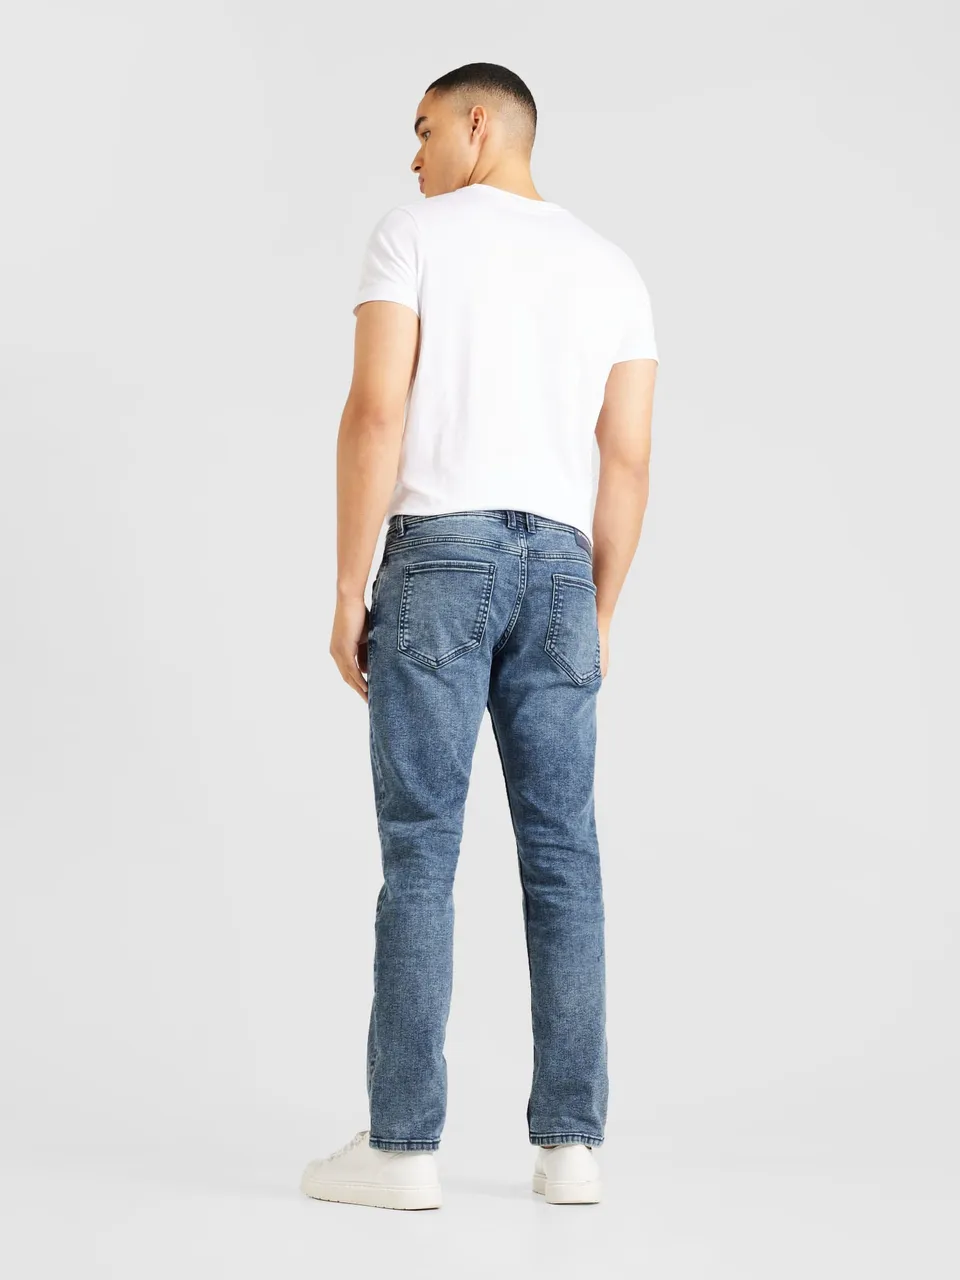 Jeans 'Marvin'